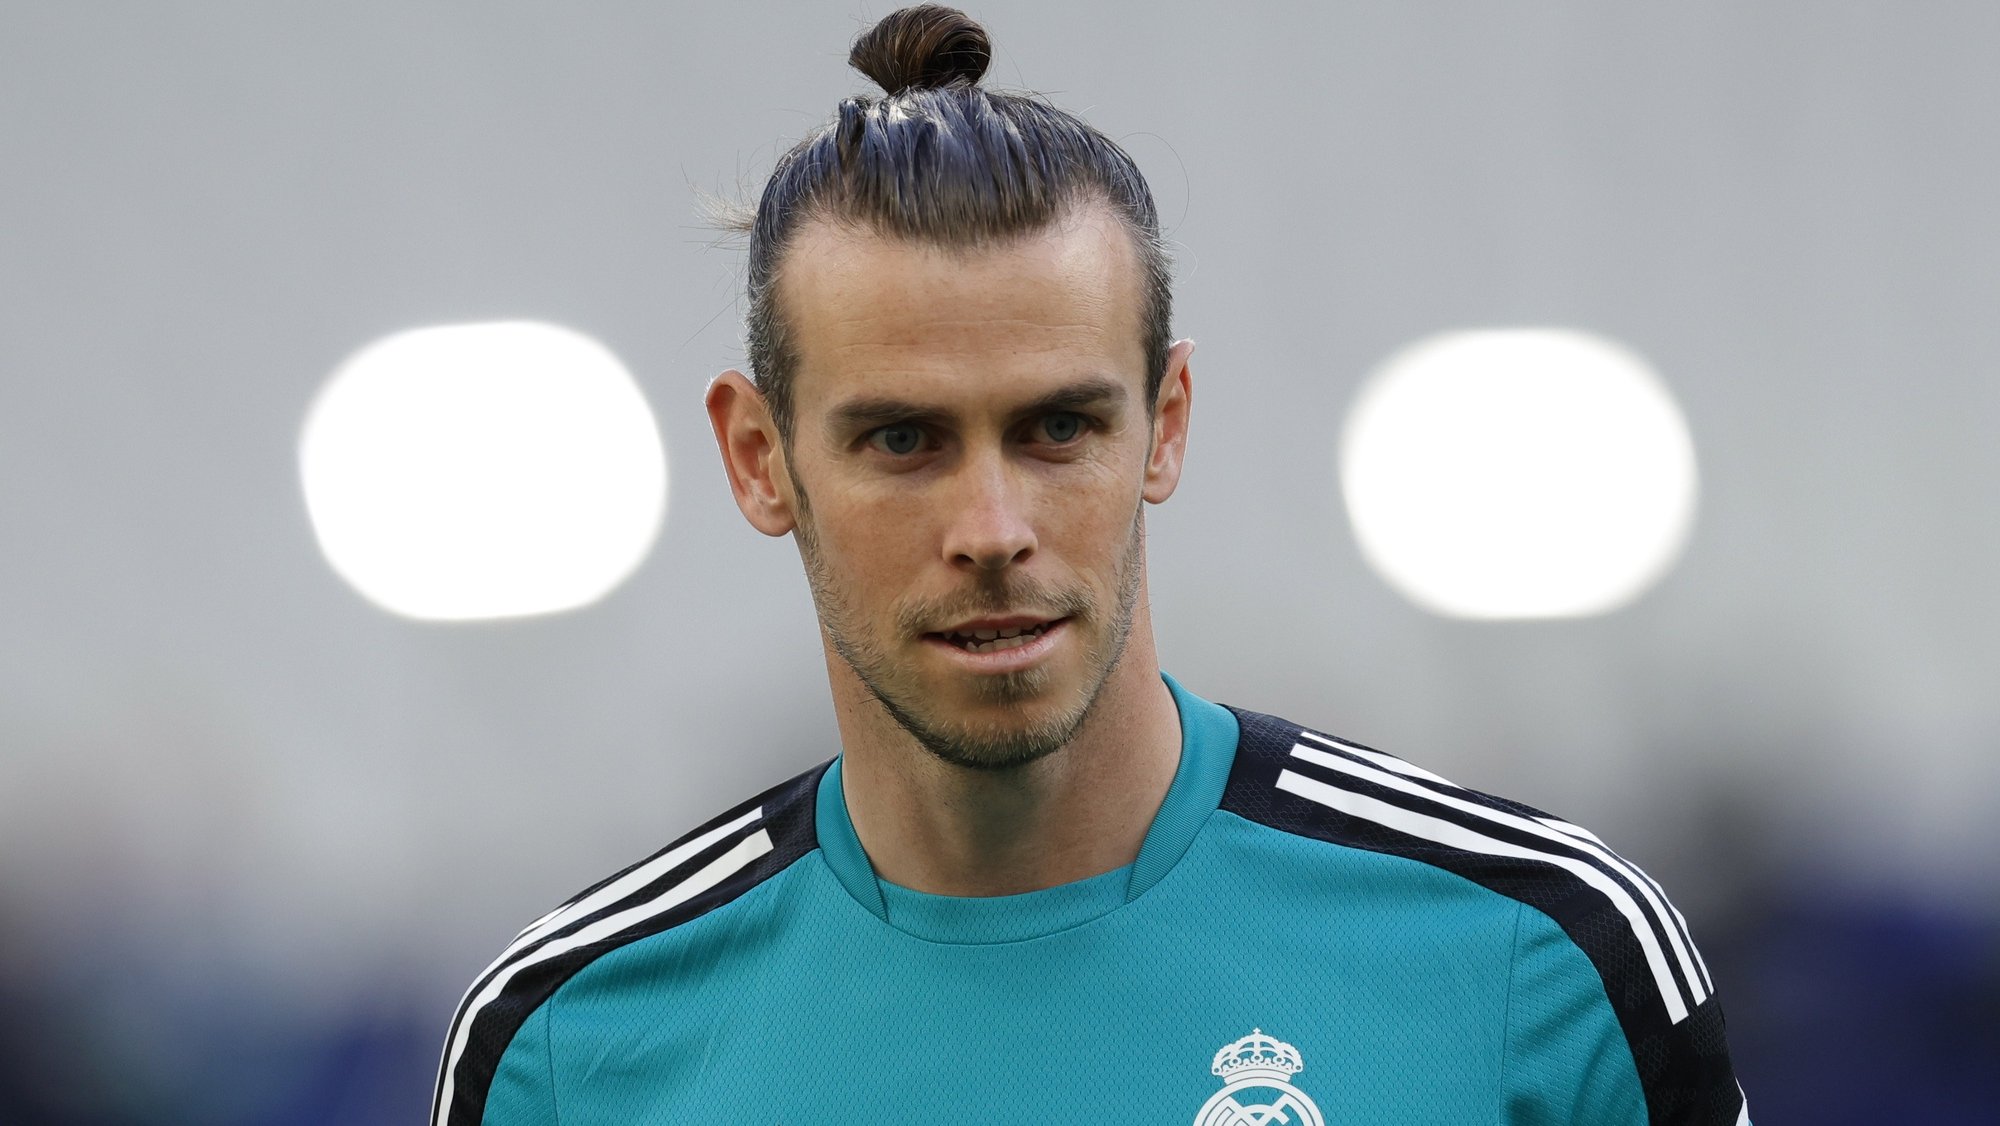 epa09980864 Gareth Bale of Real Madrid attends the team&#039;s training session at Stade de France in Saint-Denis, near Paris, France, 27 May 2022. Real Madrid will face Liverpool FC in their UEFA Champions League final on 28 May 2022.  EPA/YOAN VALAT